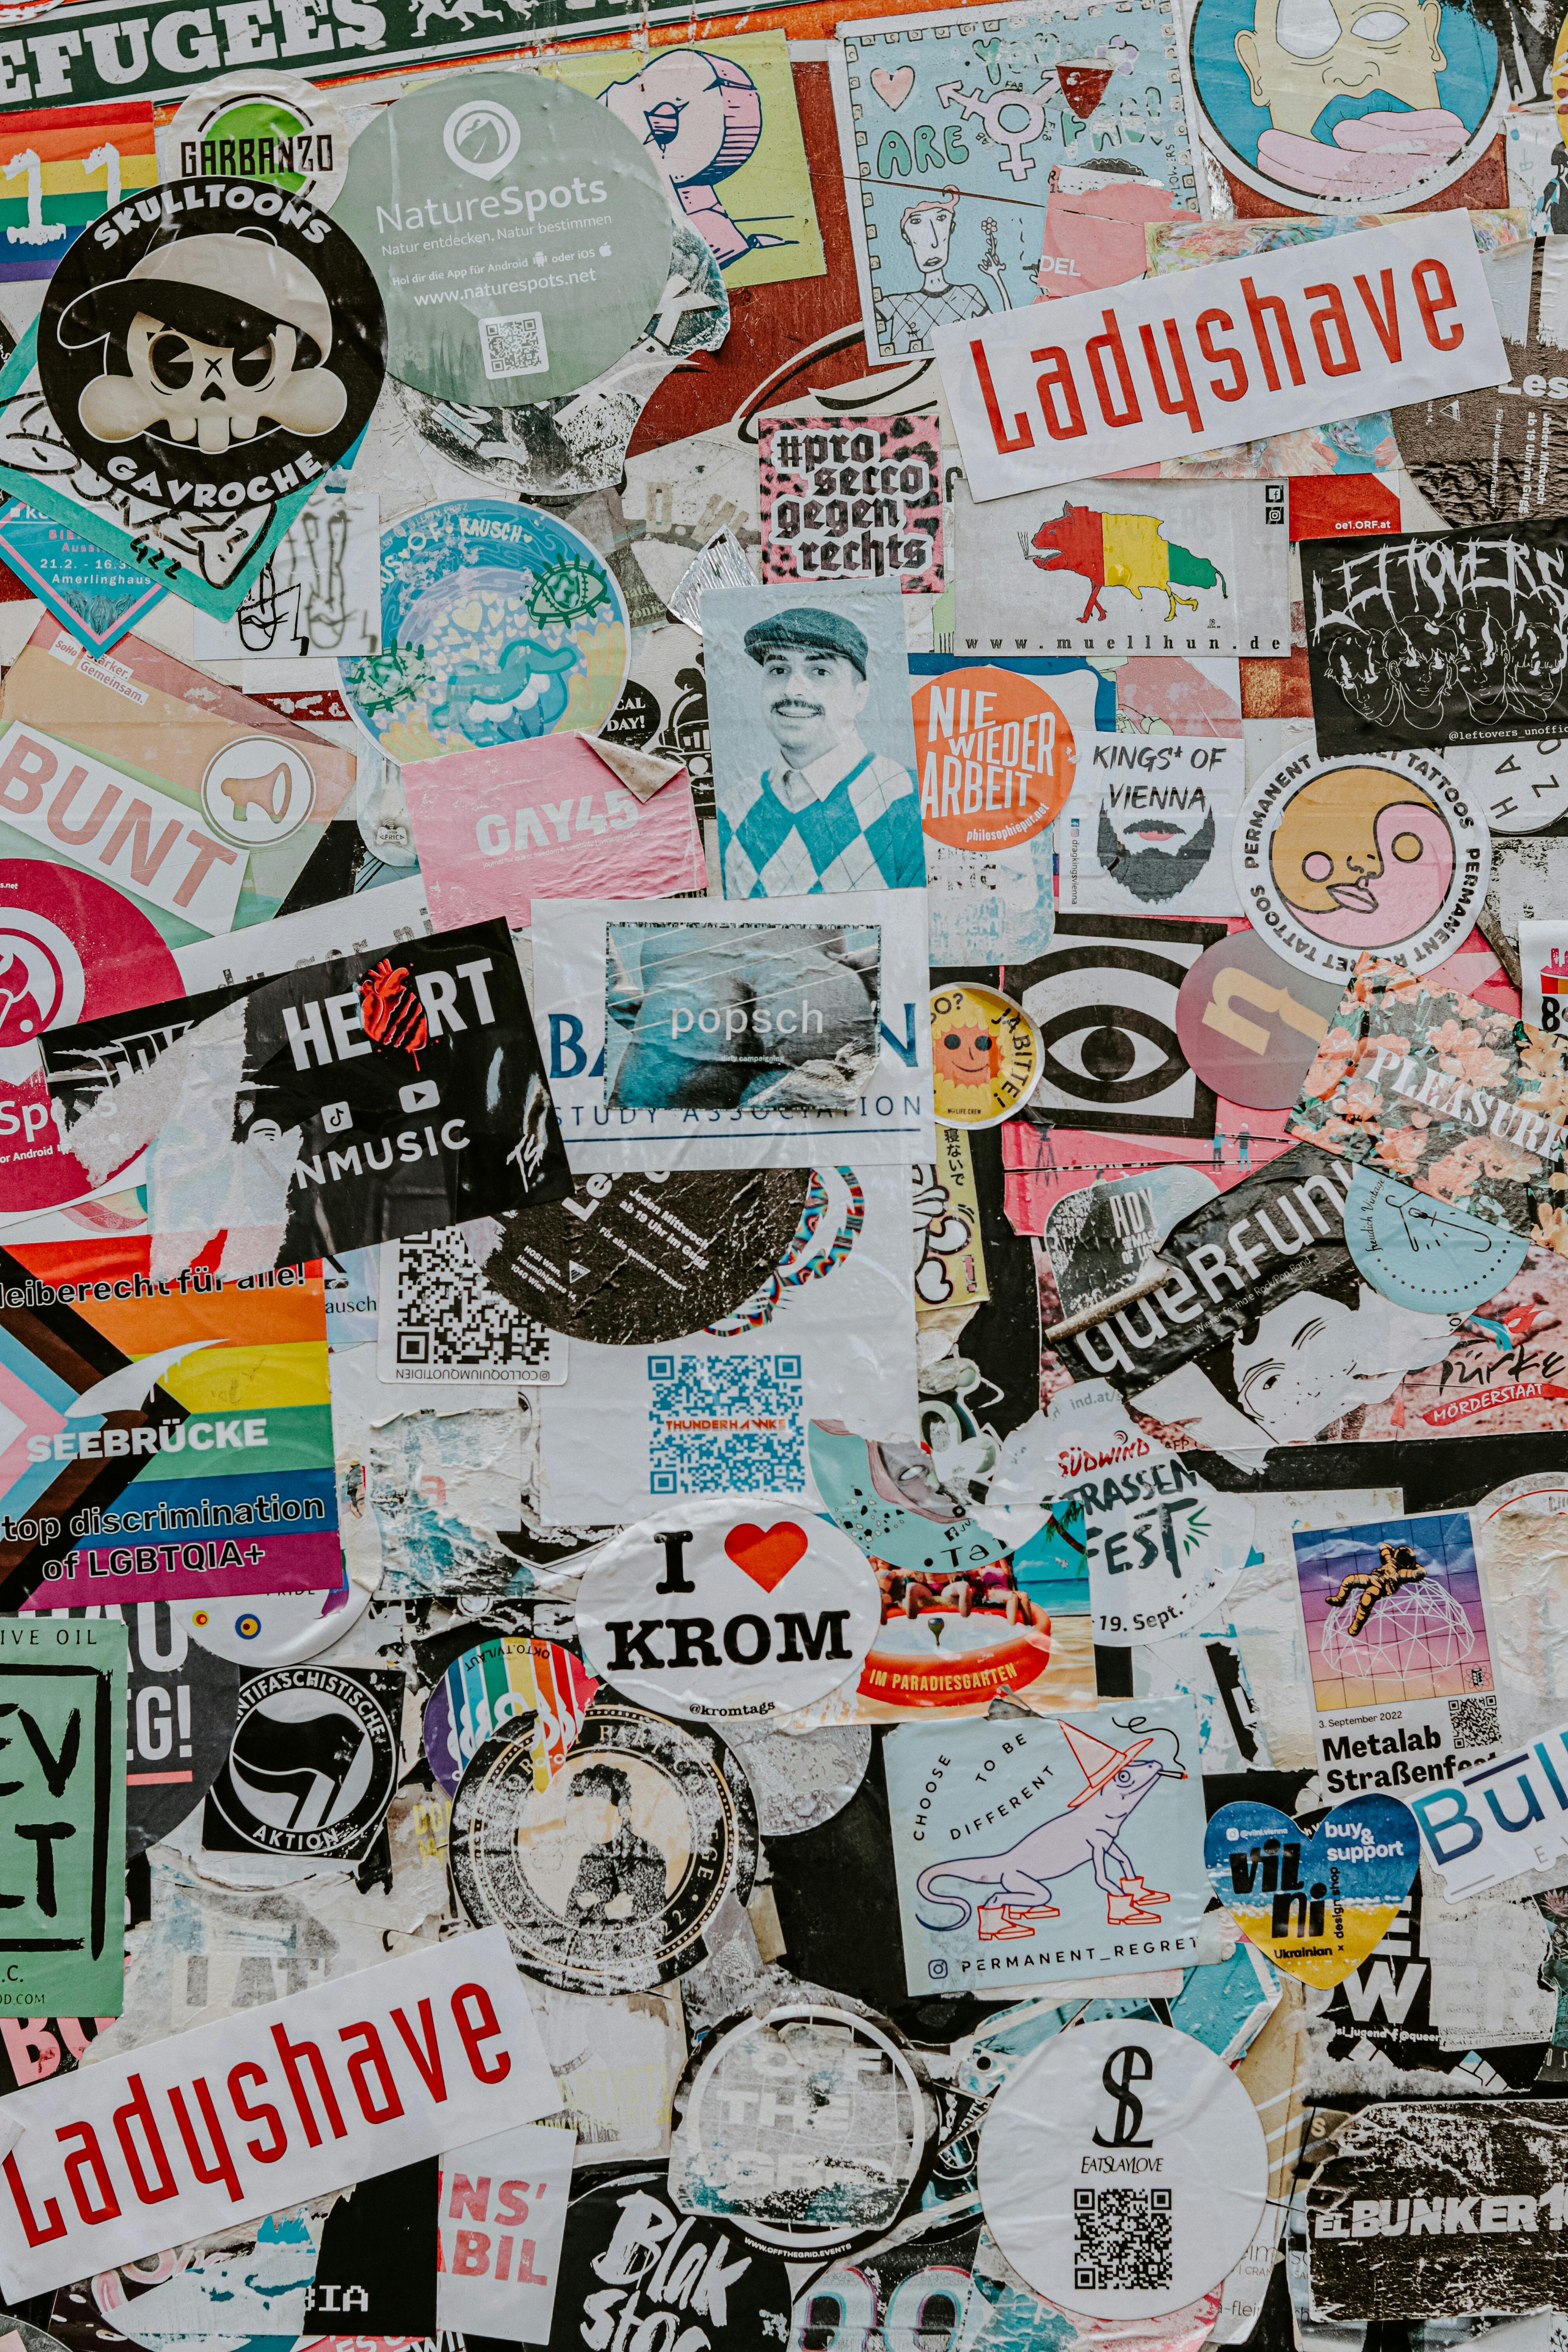  sticker bomb wallpaper hd HD Photos  Wallpapers 60 Images  Page 5